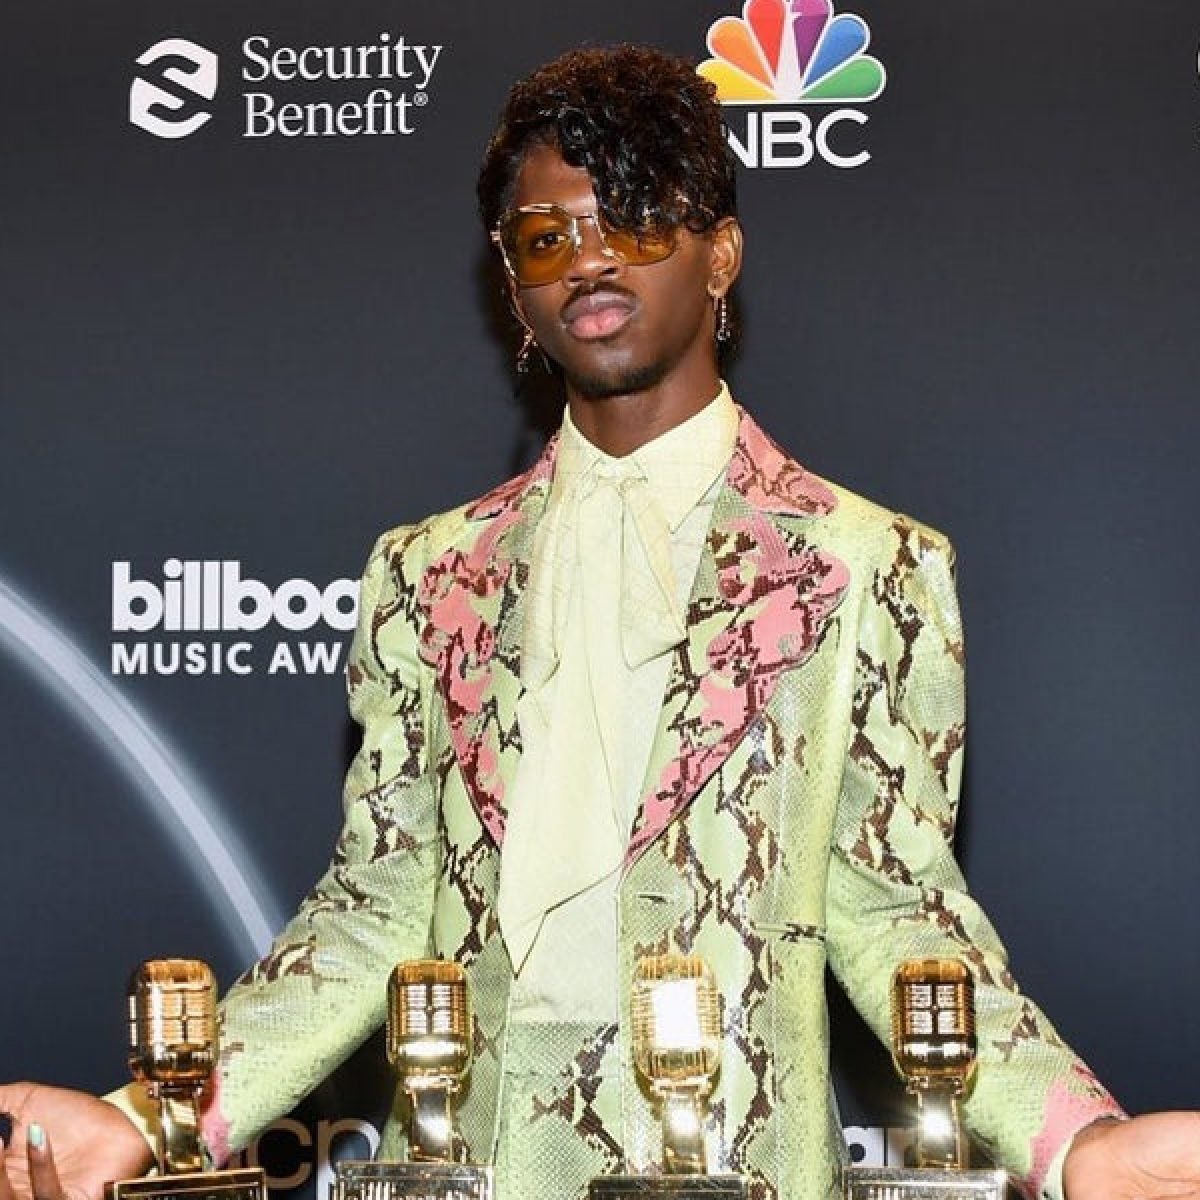 The Best Fashion And Beauty Moments At The 2020 BBMA's